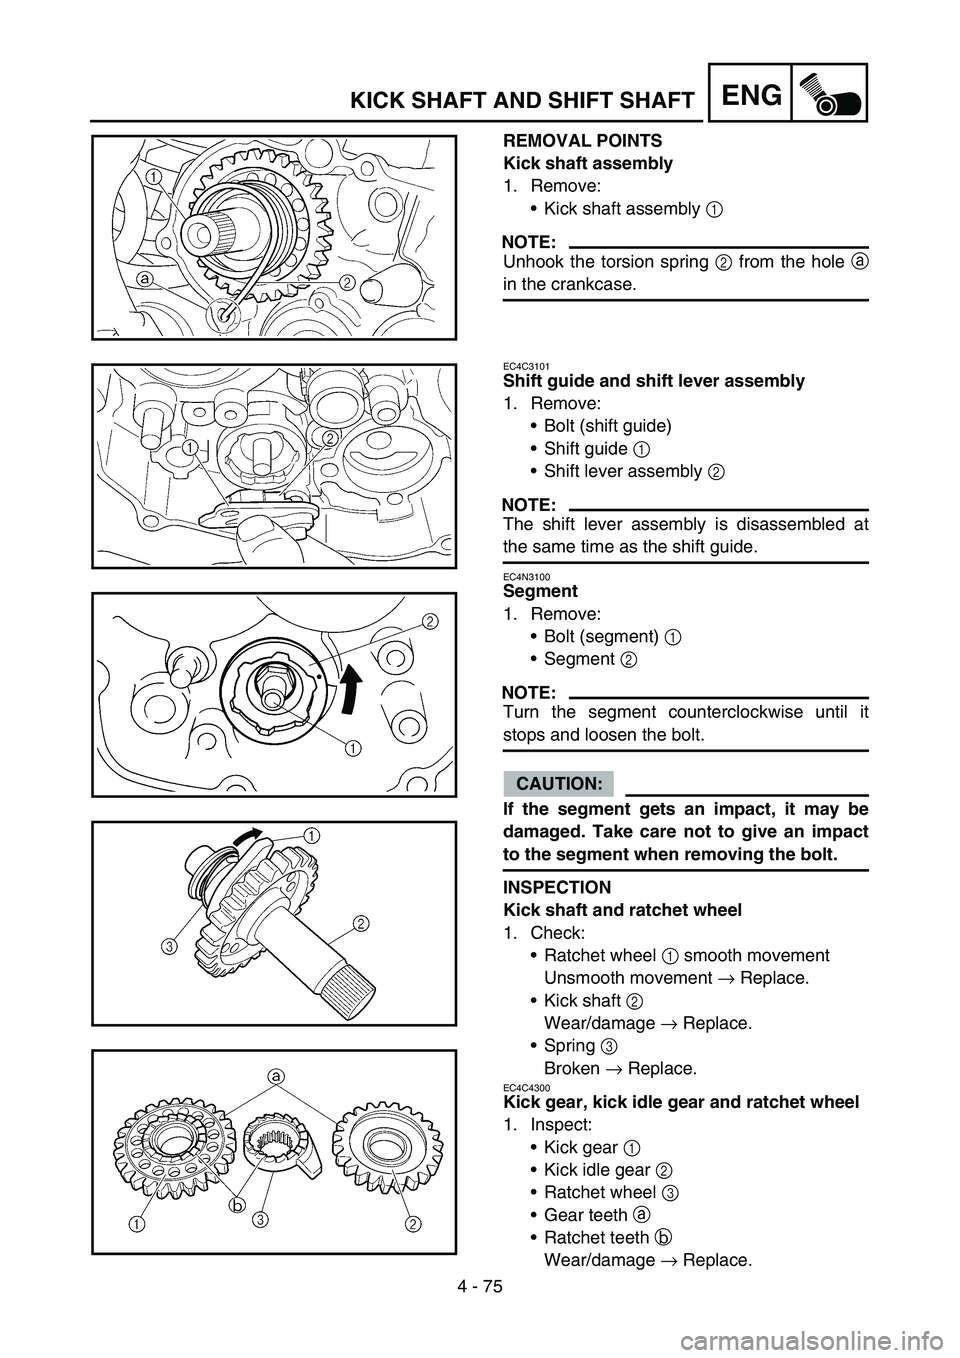 YAMAHA YZ250F 2006  Owners Manual 4 - 75
ENGKICK SHAFT AND SHIFT SHAFT
REMOVAL POINTS
Kick shaft assembly
1. Remove:
Kick shaft assembly 1 
NOTE:
Unhook the torsion spring 2 from the hole a
in the crankcase.
EC4C3101
Shift guide and 